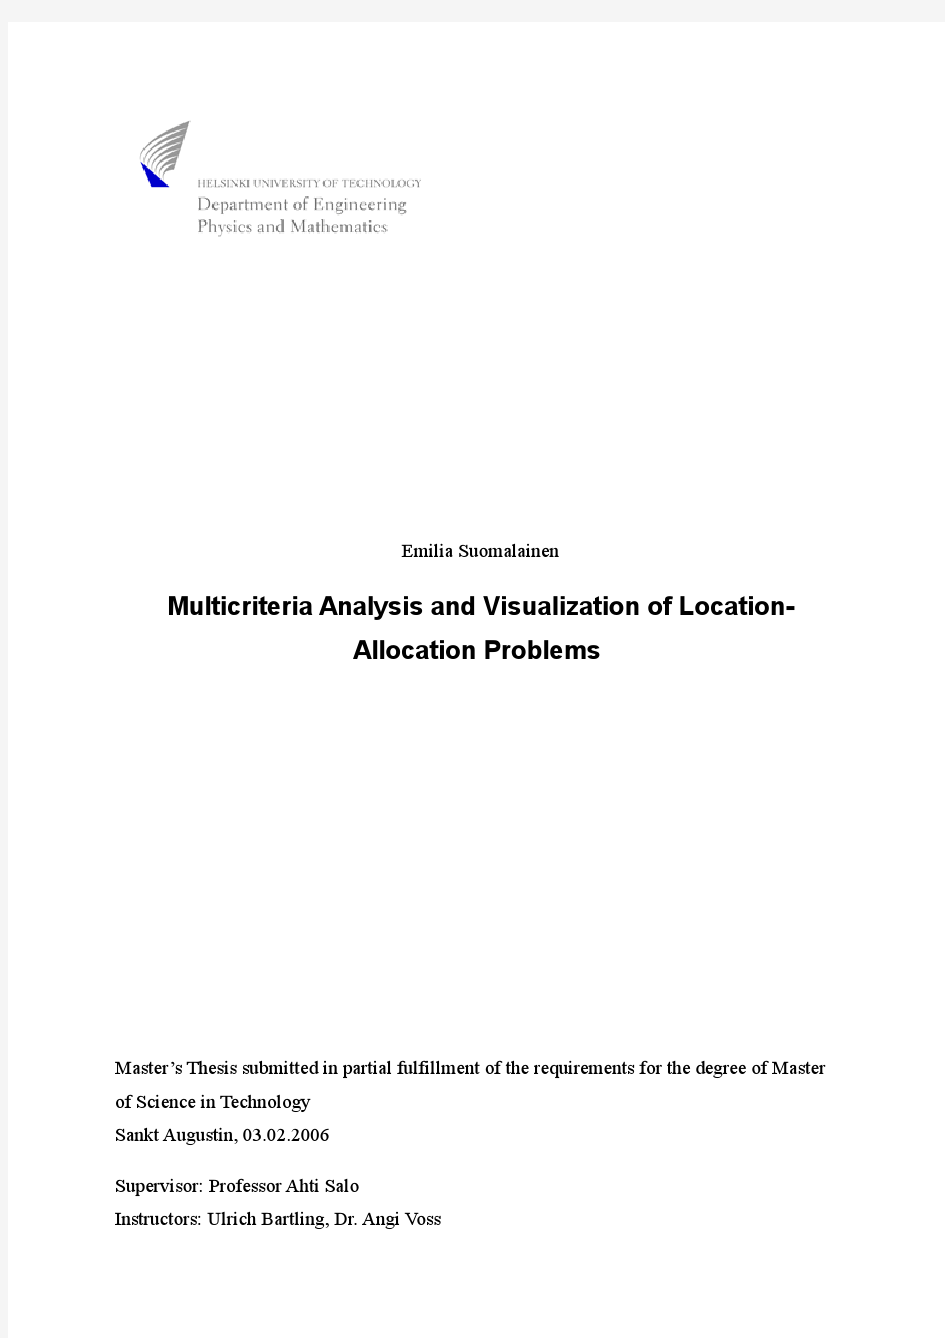 Title Multicriteria Analysis and Visualization of Location-Allocation Problems